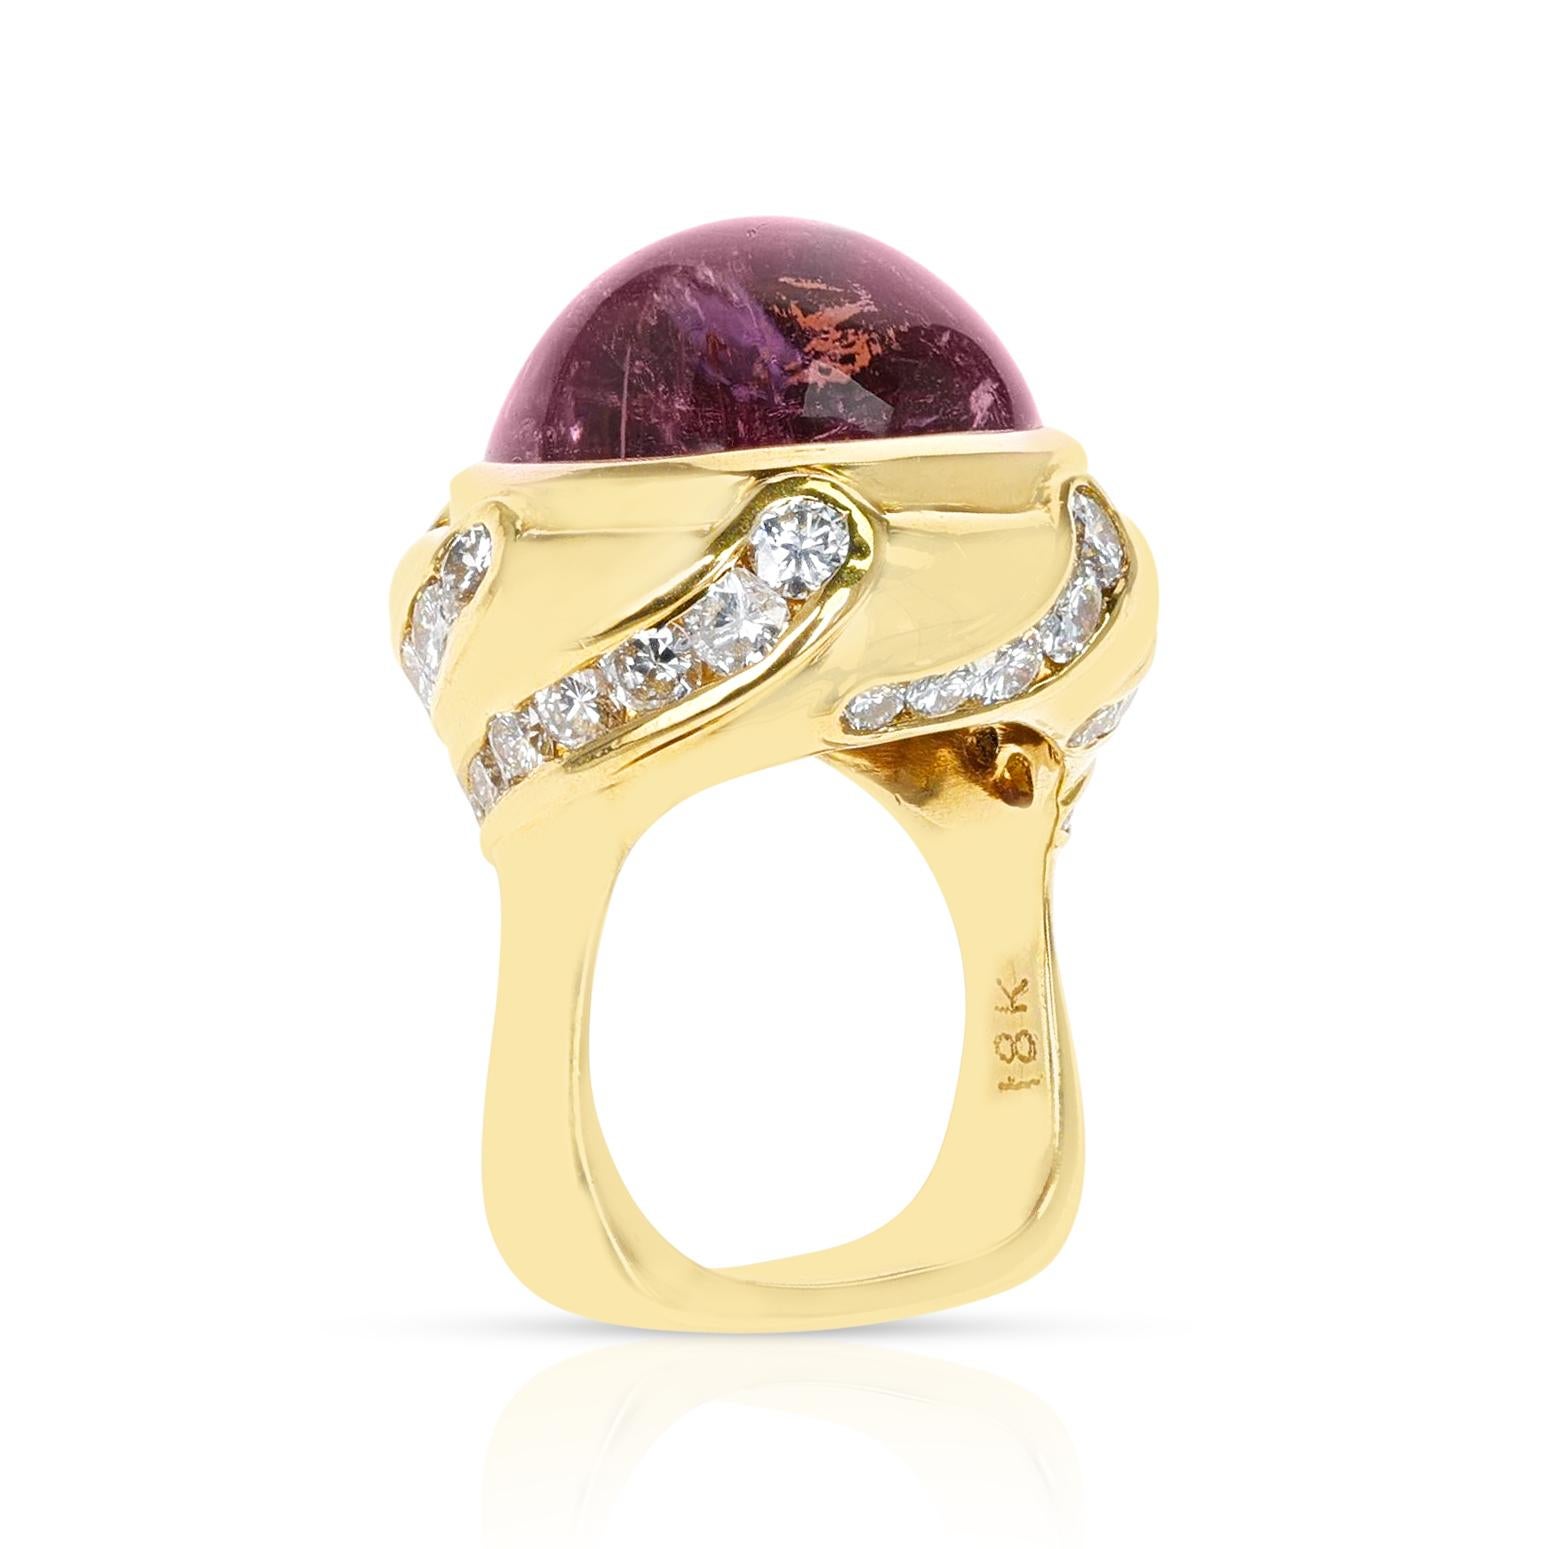 29.63 Ct. Tourmaline Cabochon and Diamond Cocktail Ring For Sale 1